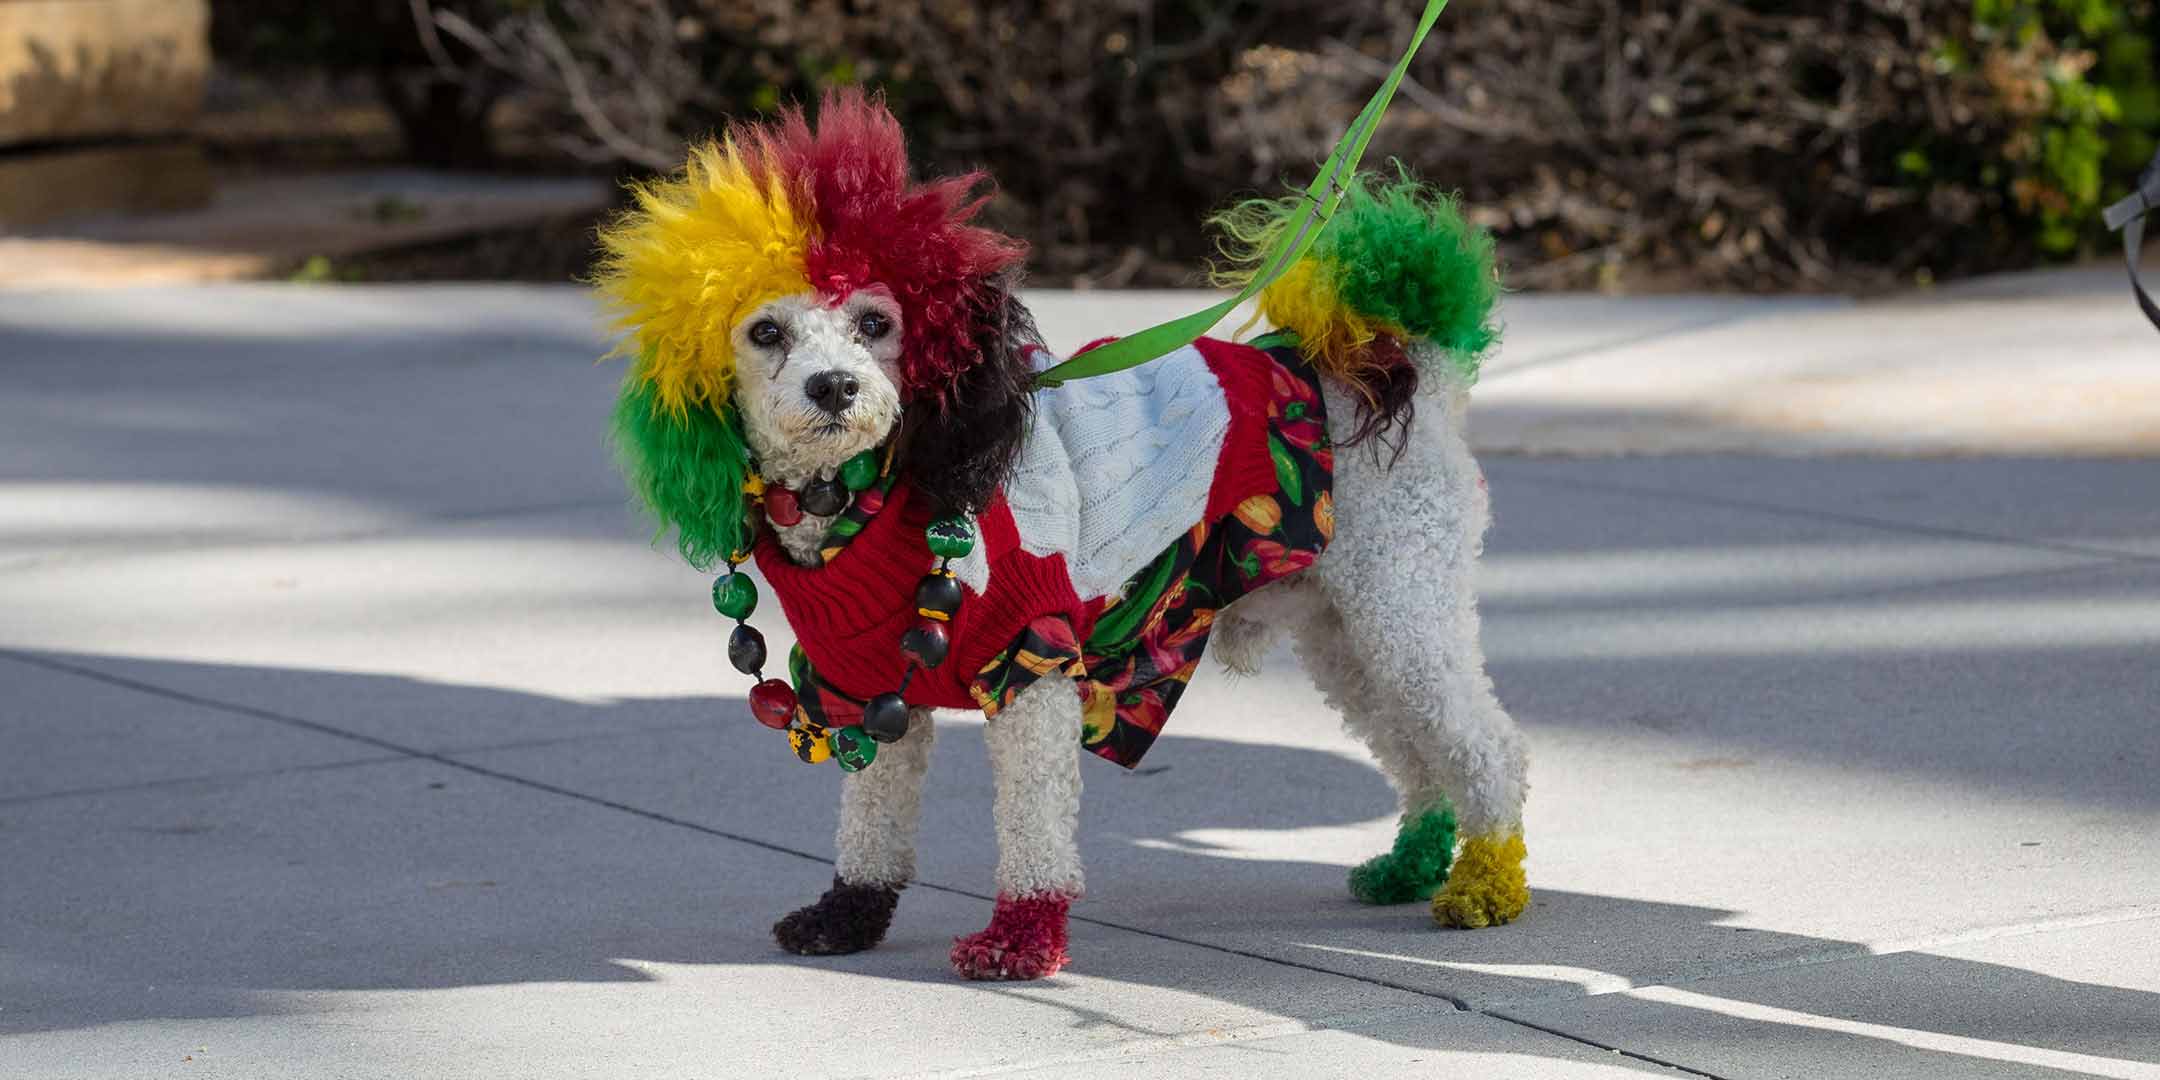 Poodle dog dressed in a clown costume